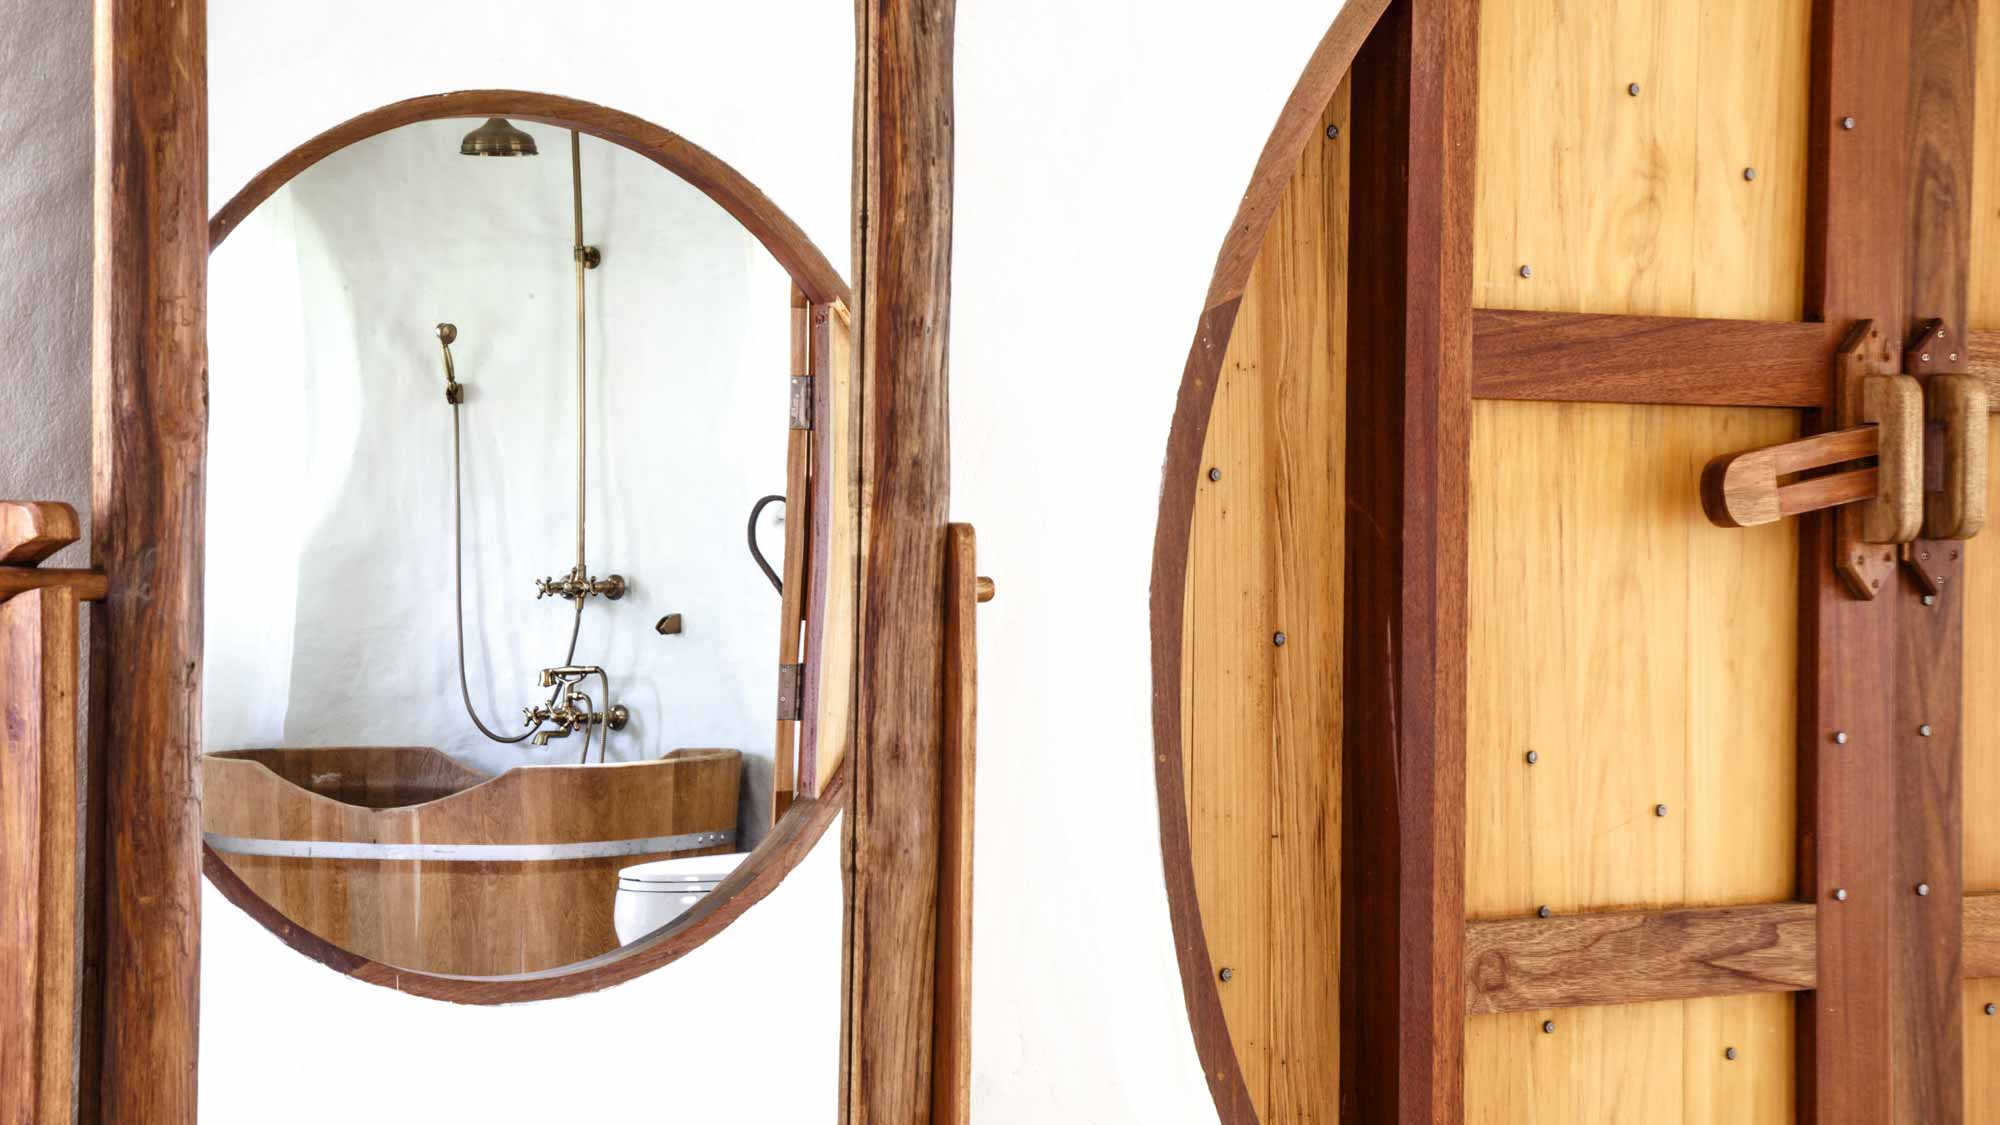 Looking through large round wooden doorway at a wooden bathtub and rain shower in the bathroom of the Hobbit Villa at the Mala Dhara Eco Resort and Yoga Retreat Center in chiang Mai Thailand.